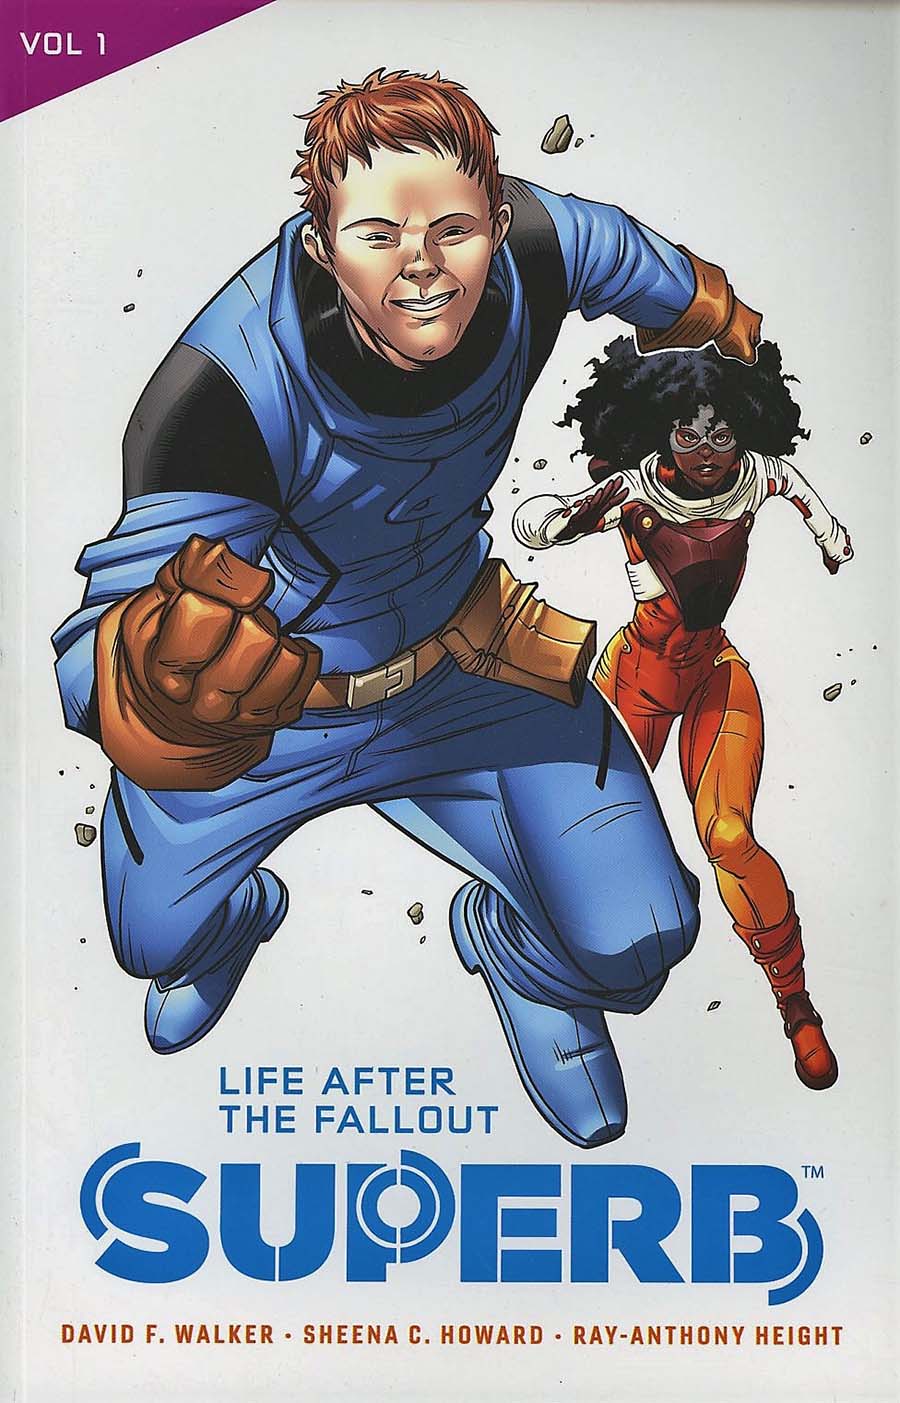 Catalyst Prime Superb Vol 1 Life After The Fallout TP